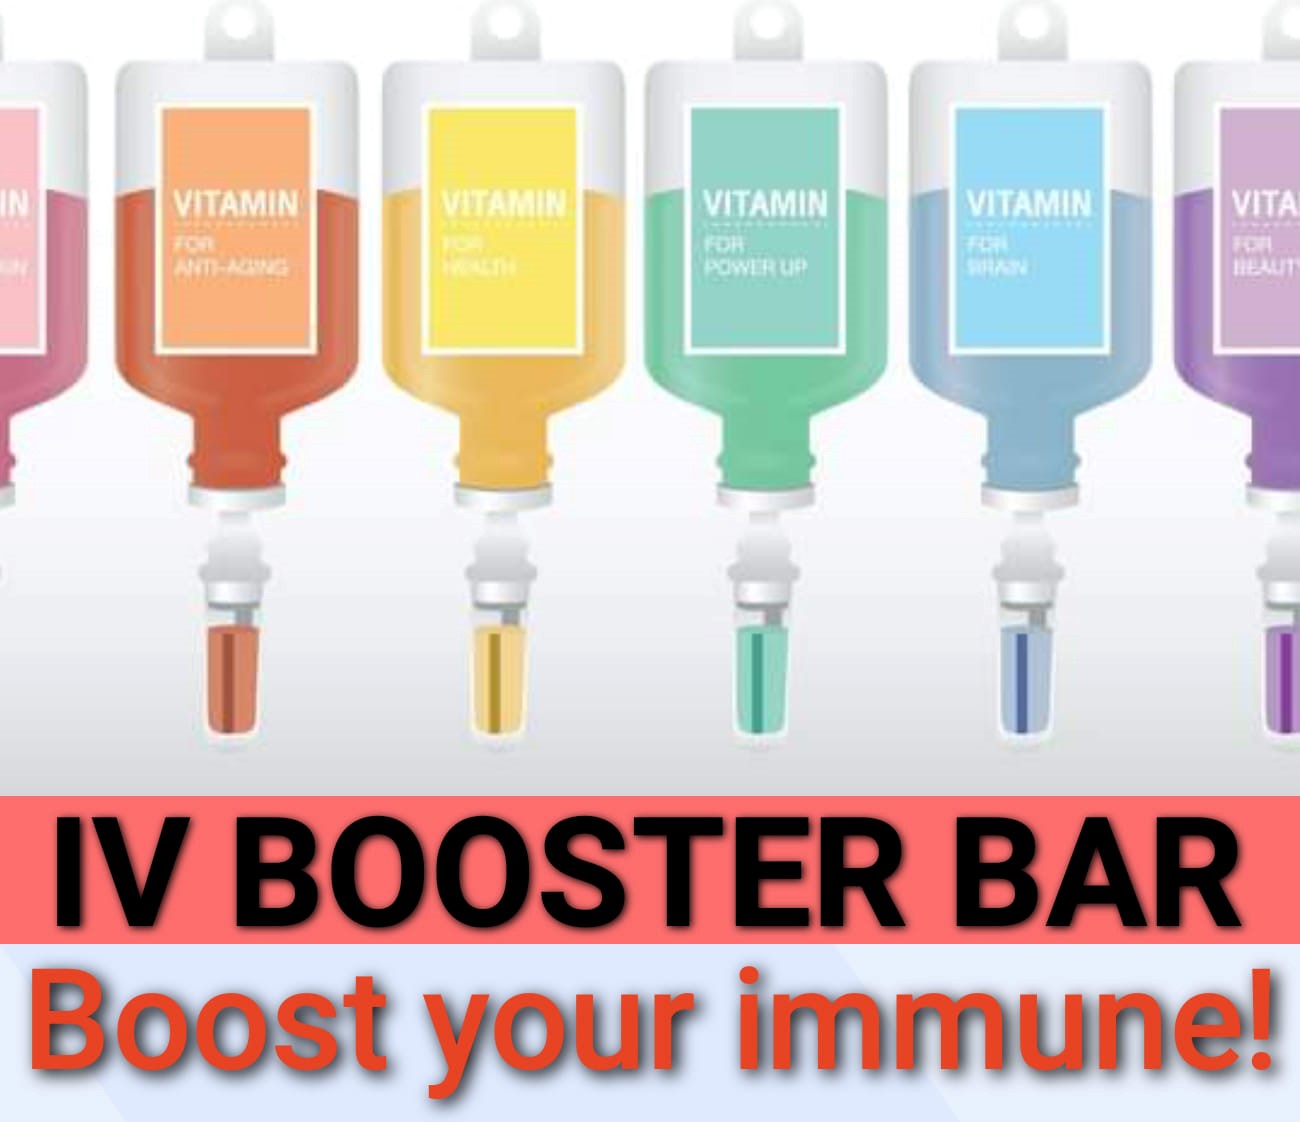 IV Booster Bar and Medical Centre 10